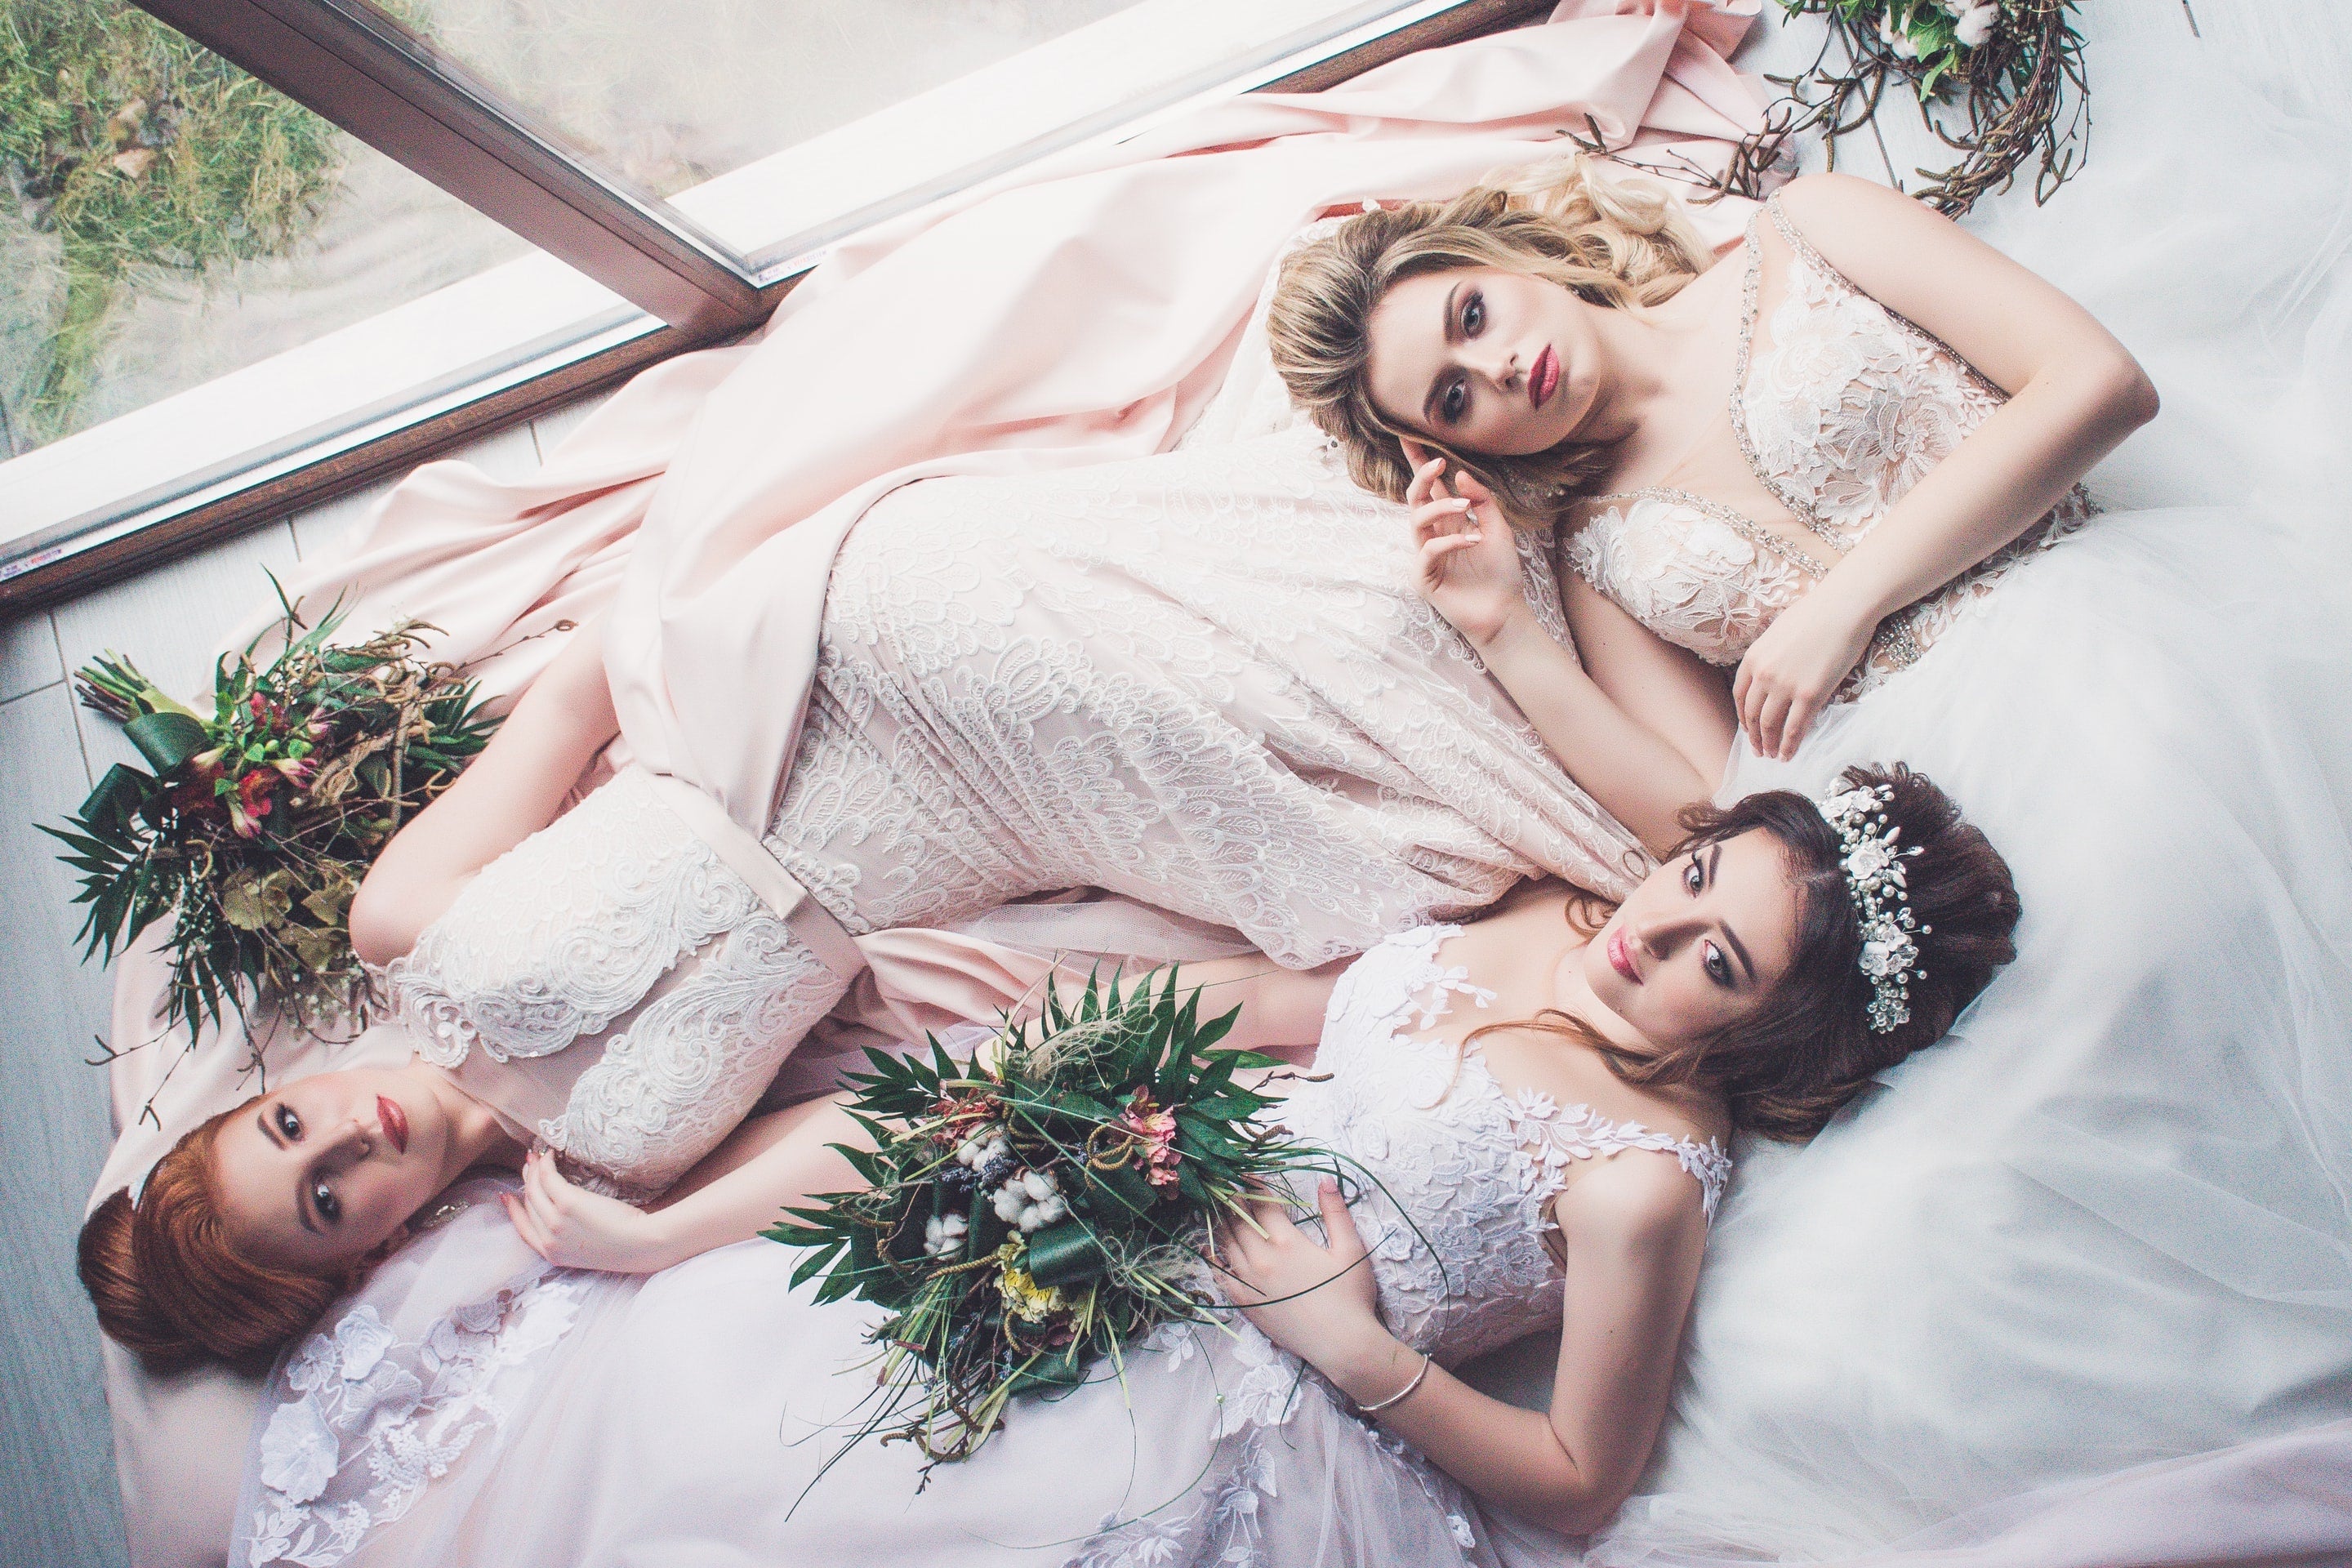 Three brides, blonde, red, and brunette, recline together.